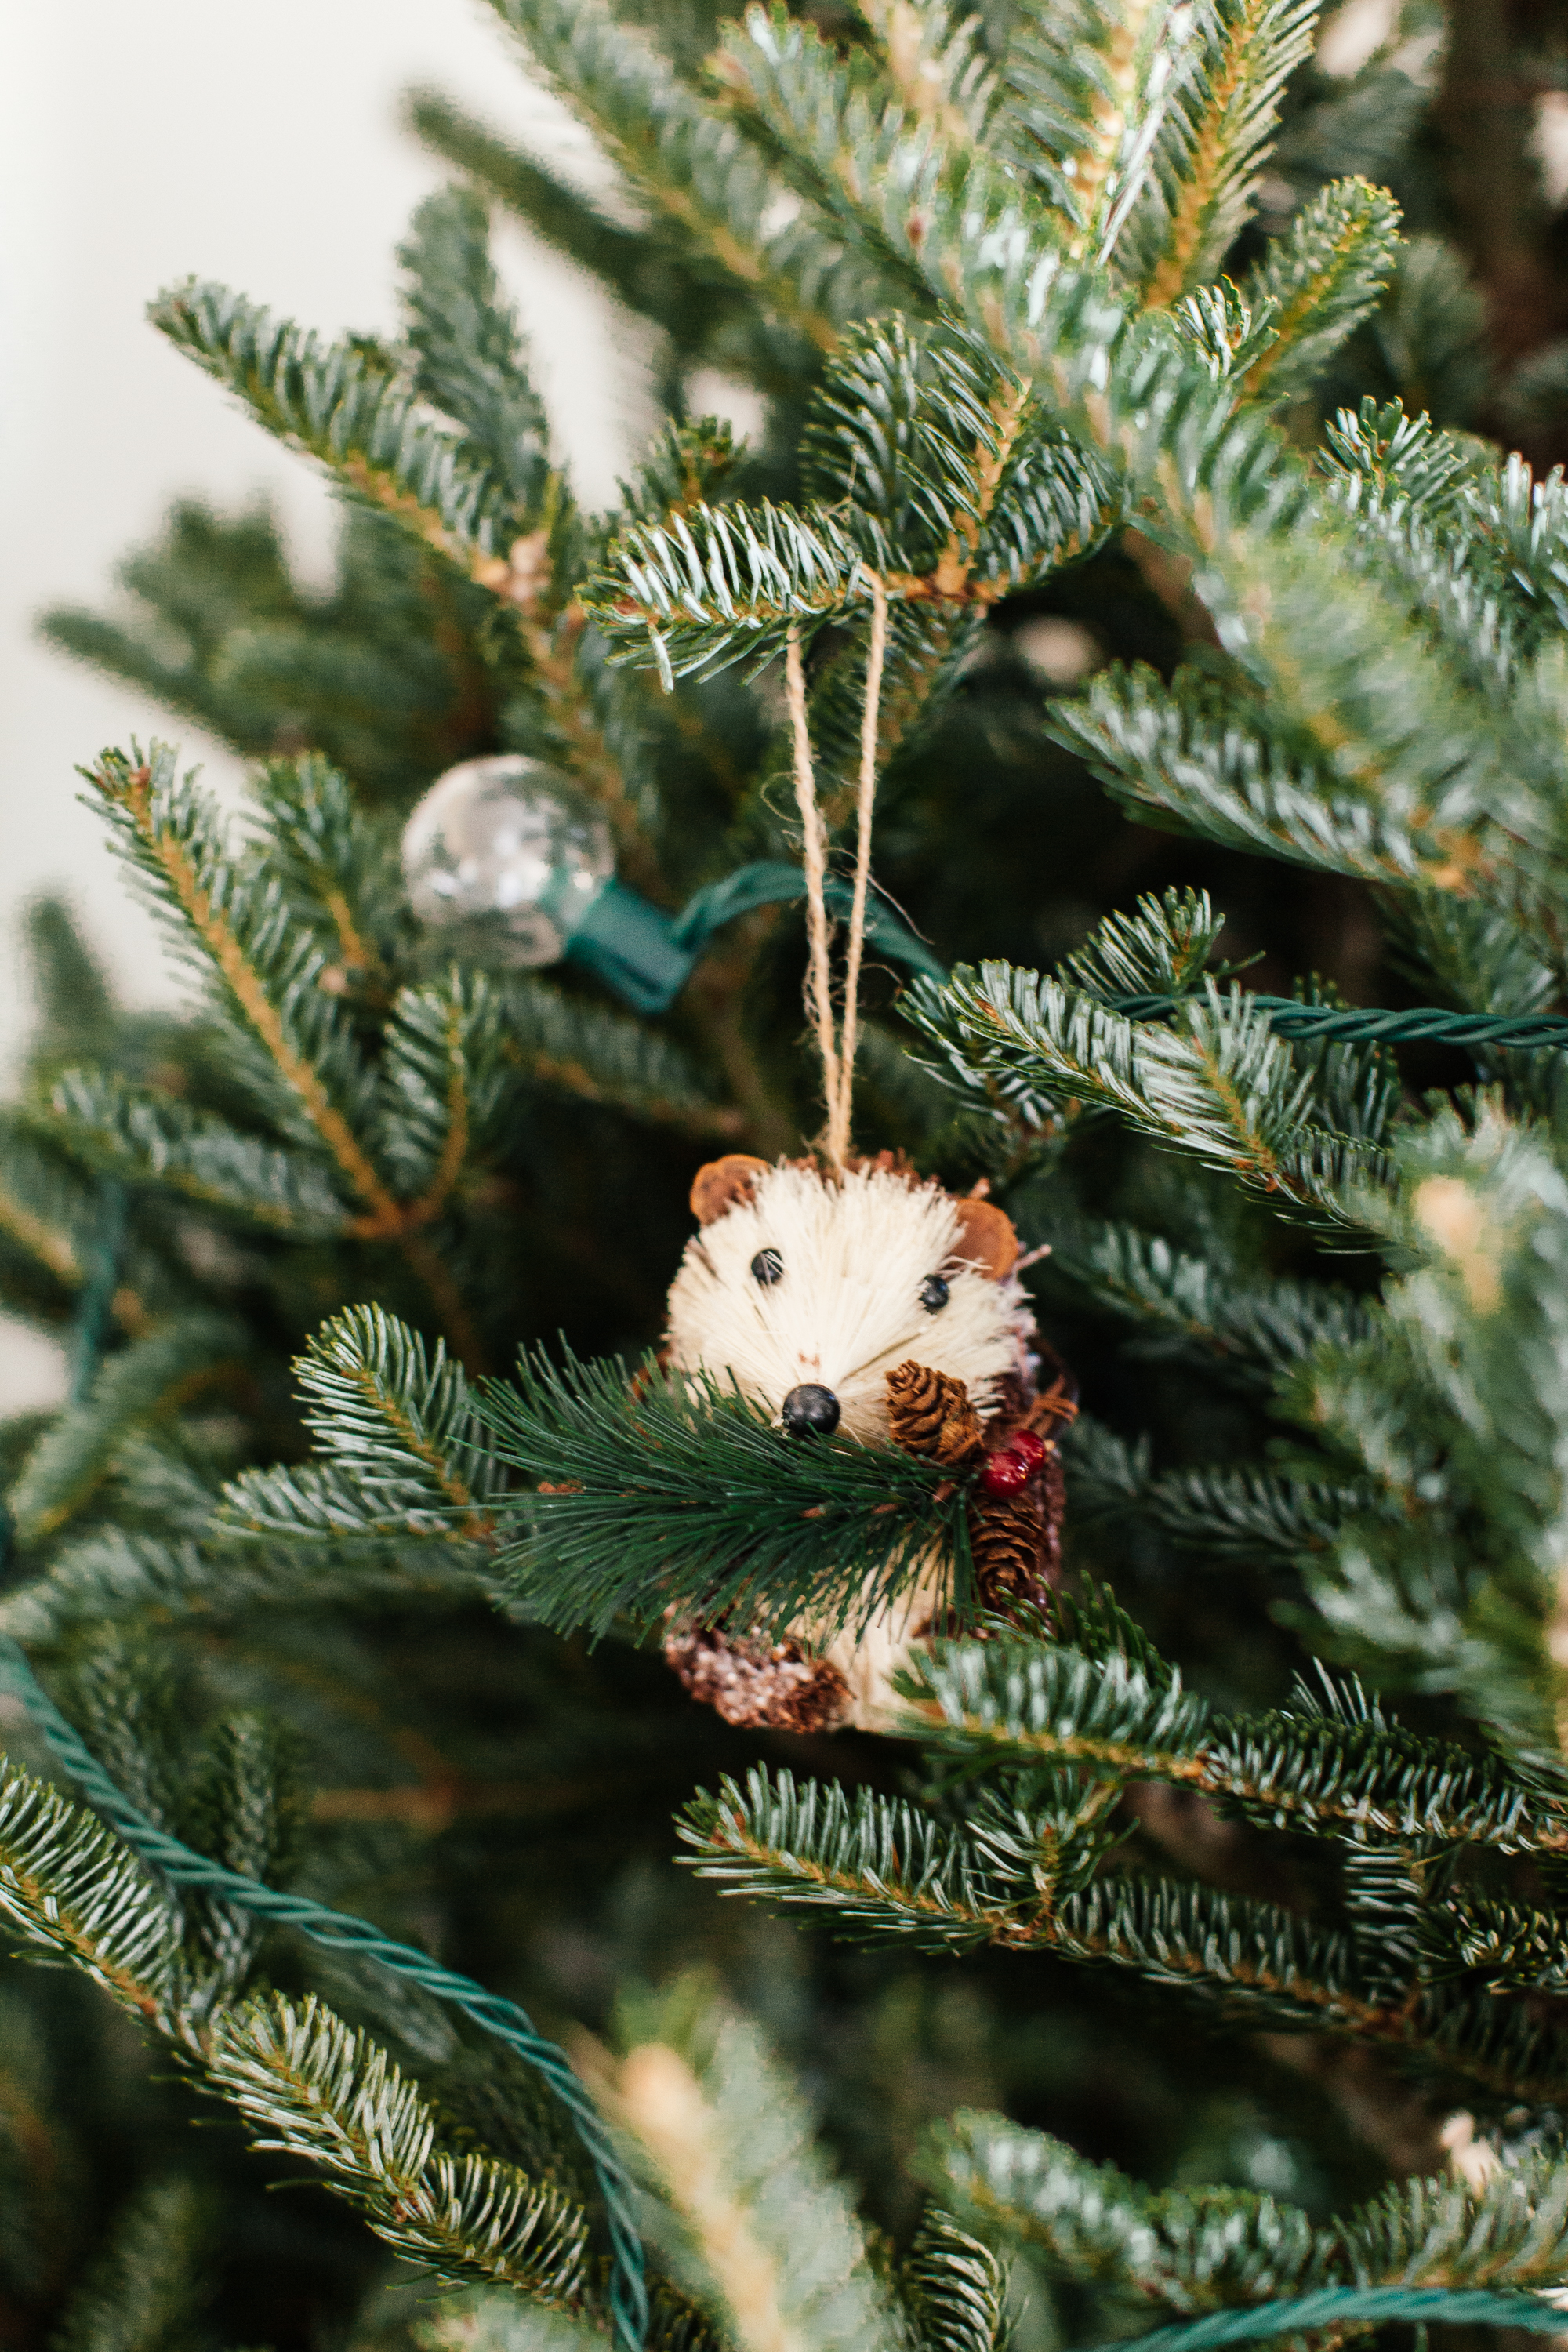 Celebrating our holiday traditions, old & new, with Wayfair. | bygabriella.co